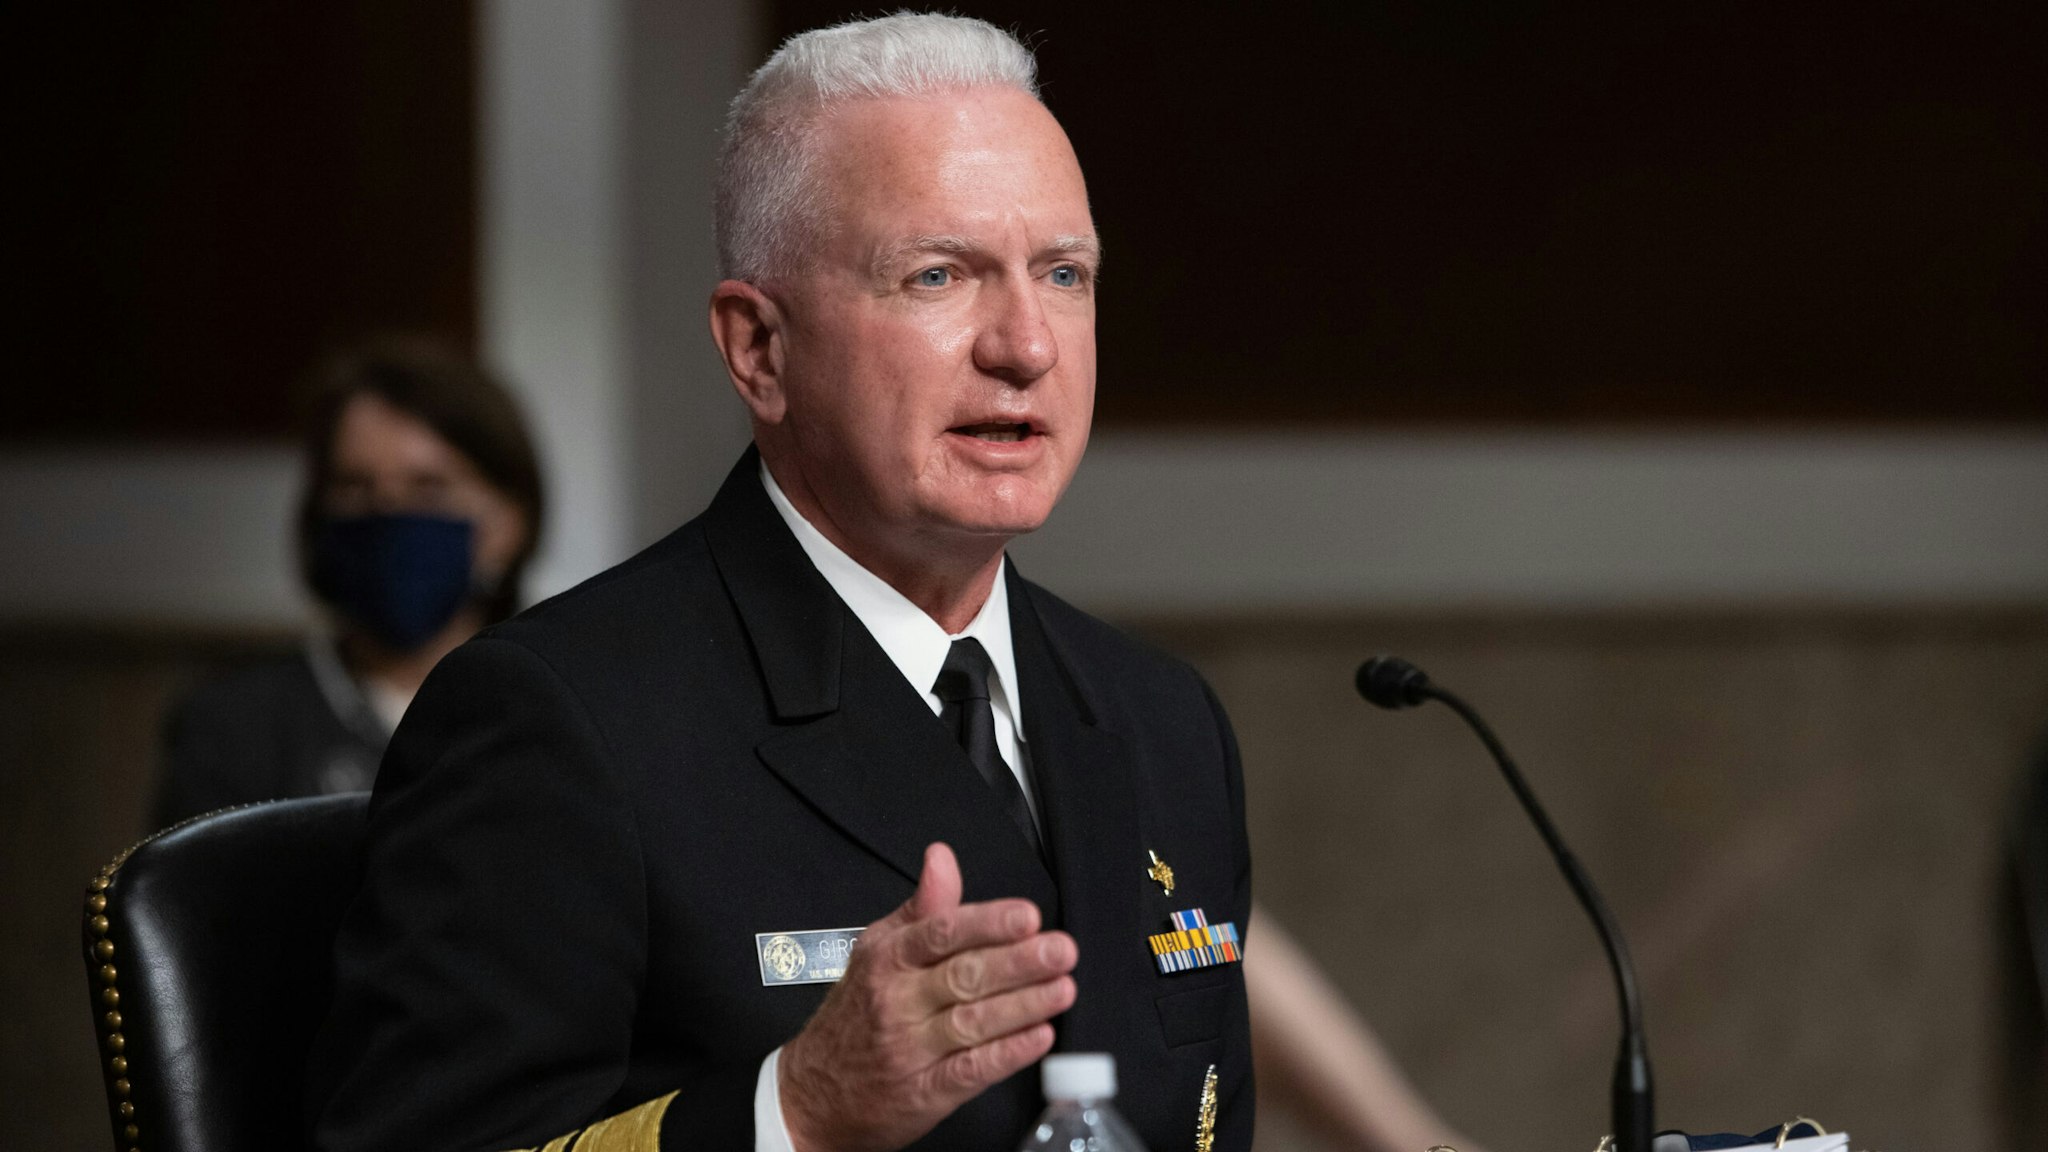 Admiral Brett Giroir, U.S. assistant secretary for health, speaks during a Senate Health Education Labor and Pensions Committee hearing in Washington, D.C., U.S., on Wednesday, Sept. 23, 2020. The U.S. death toll from the novel coronavirus exceeded 200,000 yesterday, a grim milestone that comes eight months after the pathogen was first confirmed on American soil.